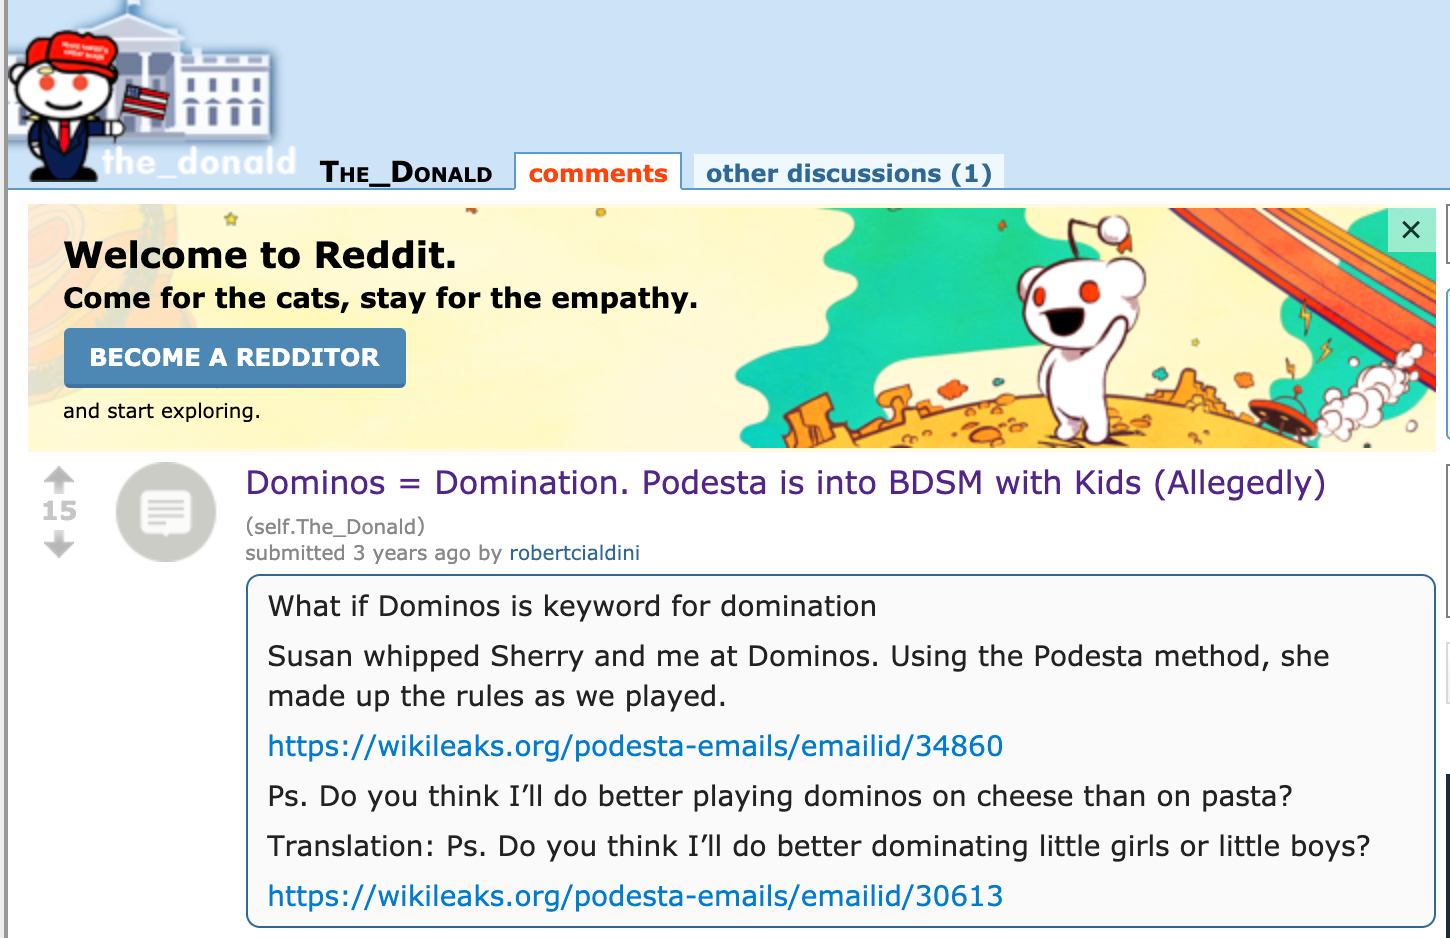 THE_DONALD - Dominos Domination. Podesta is into Bdsm with Kids Allegedly self.